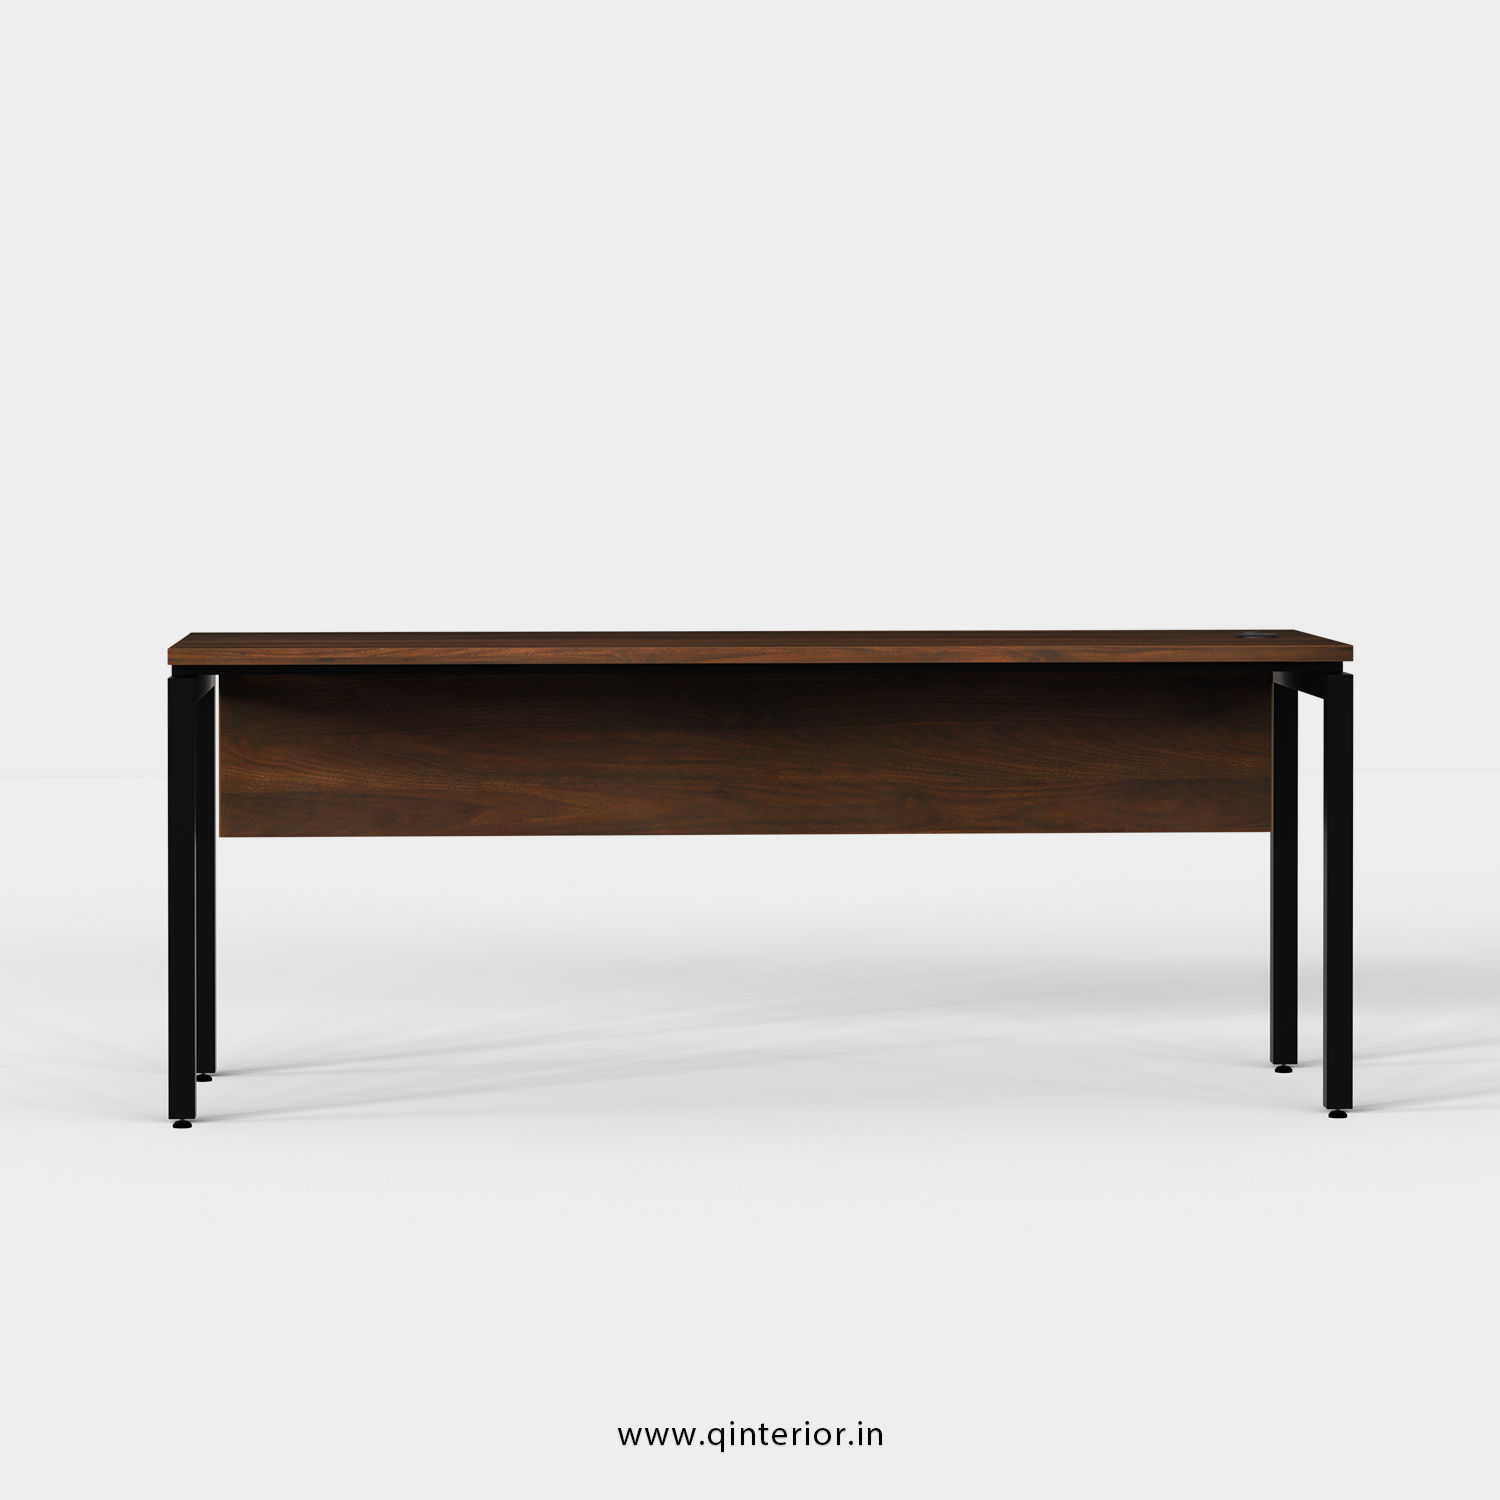 Montel Executive Table in Walnut Finish - OET001 C1